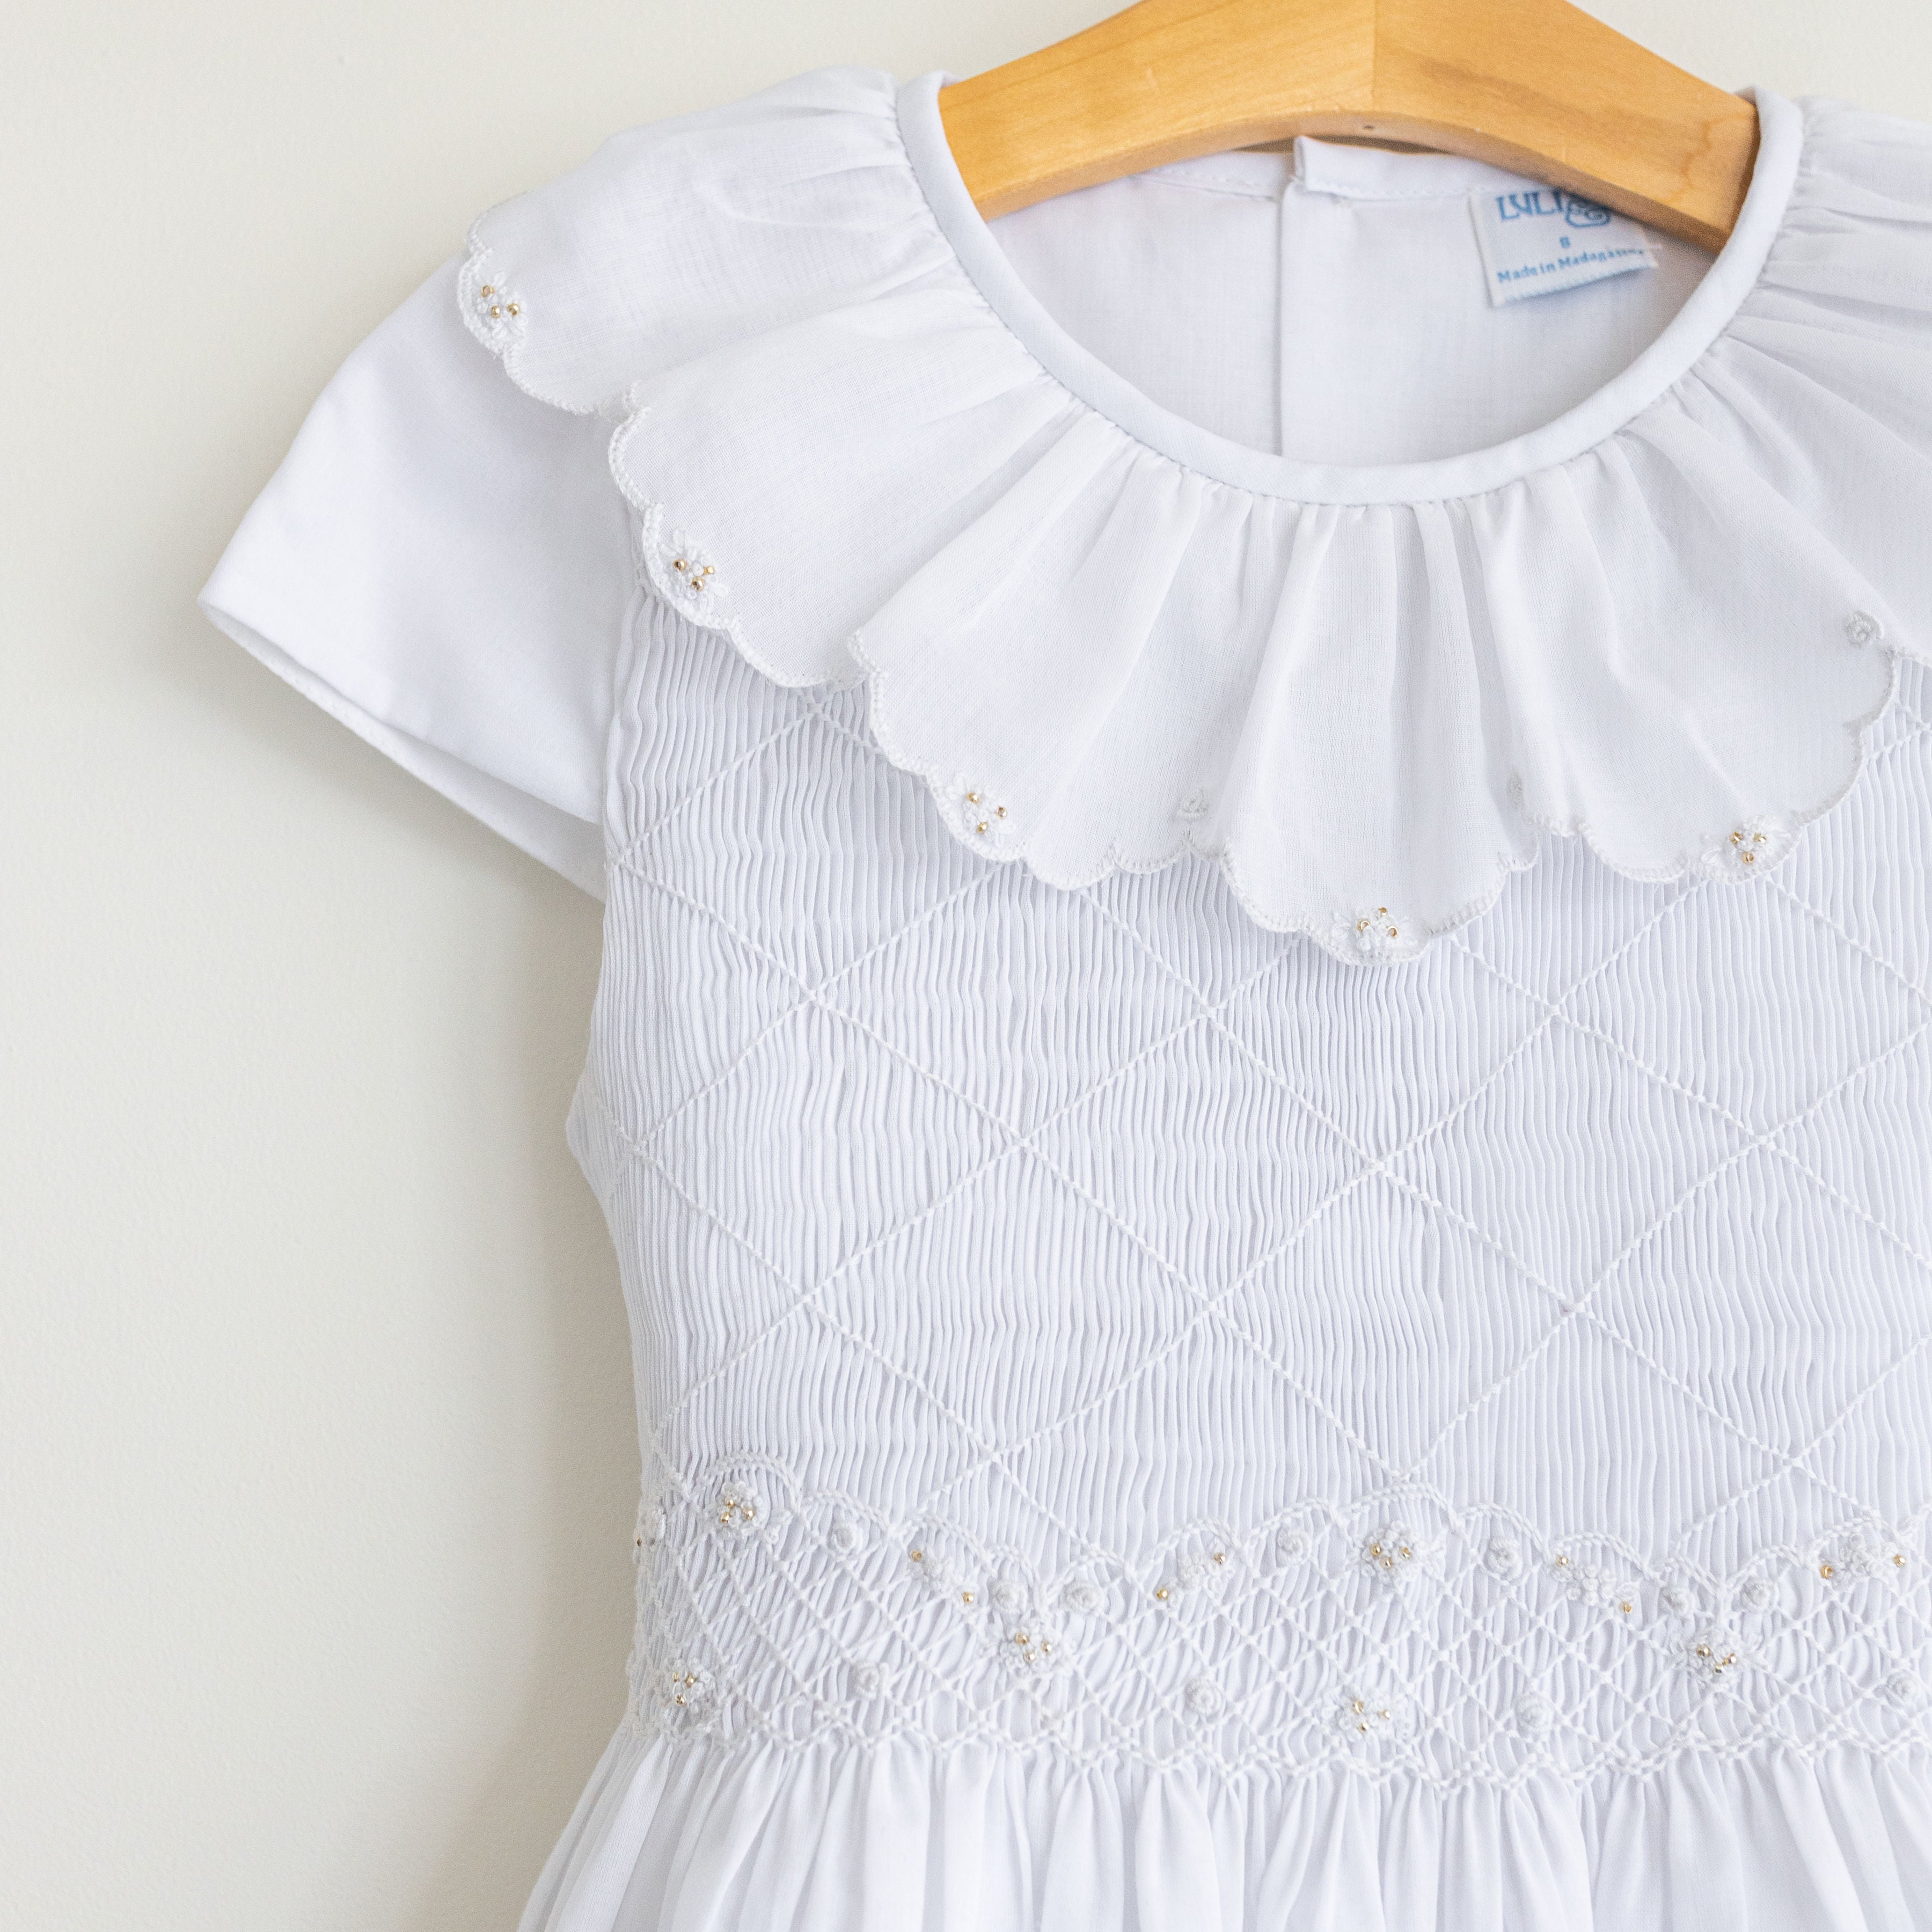 White Dress Smocked With Scallop Collar